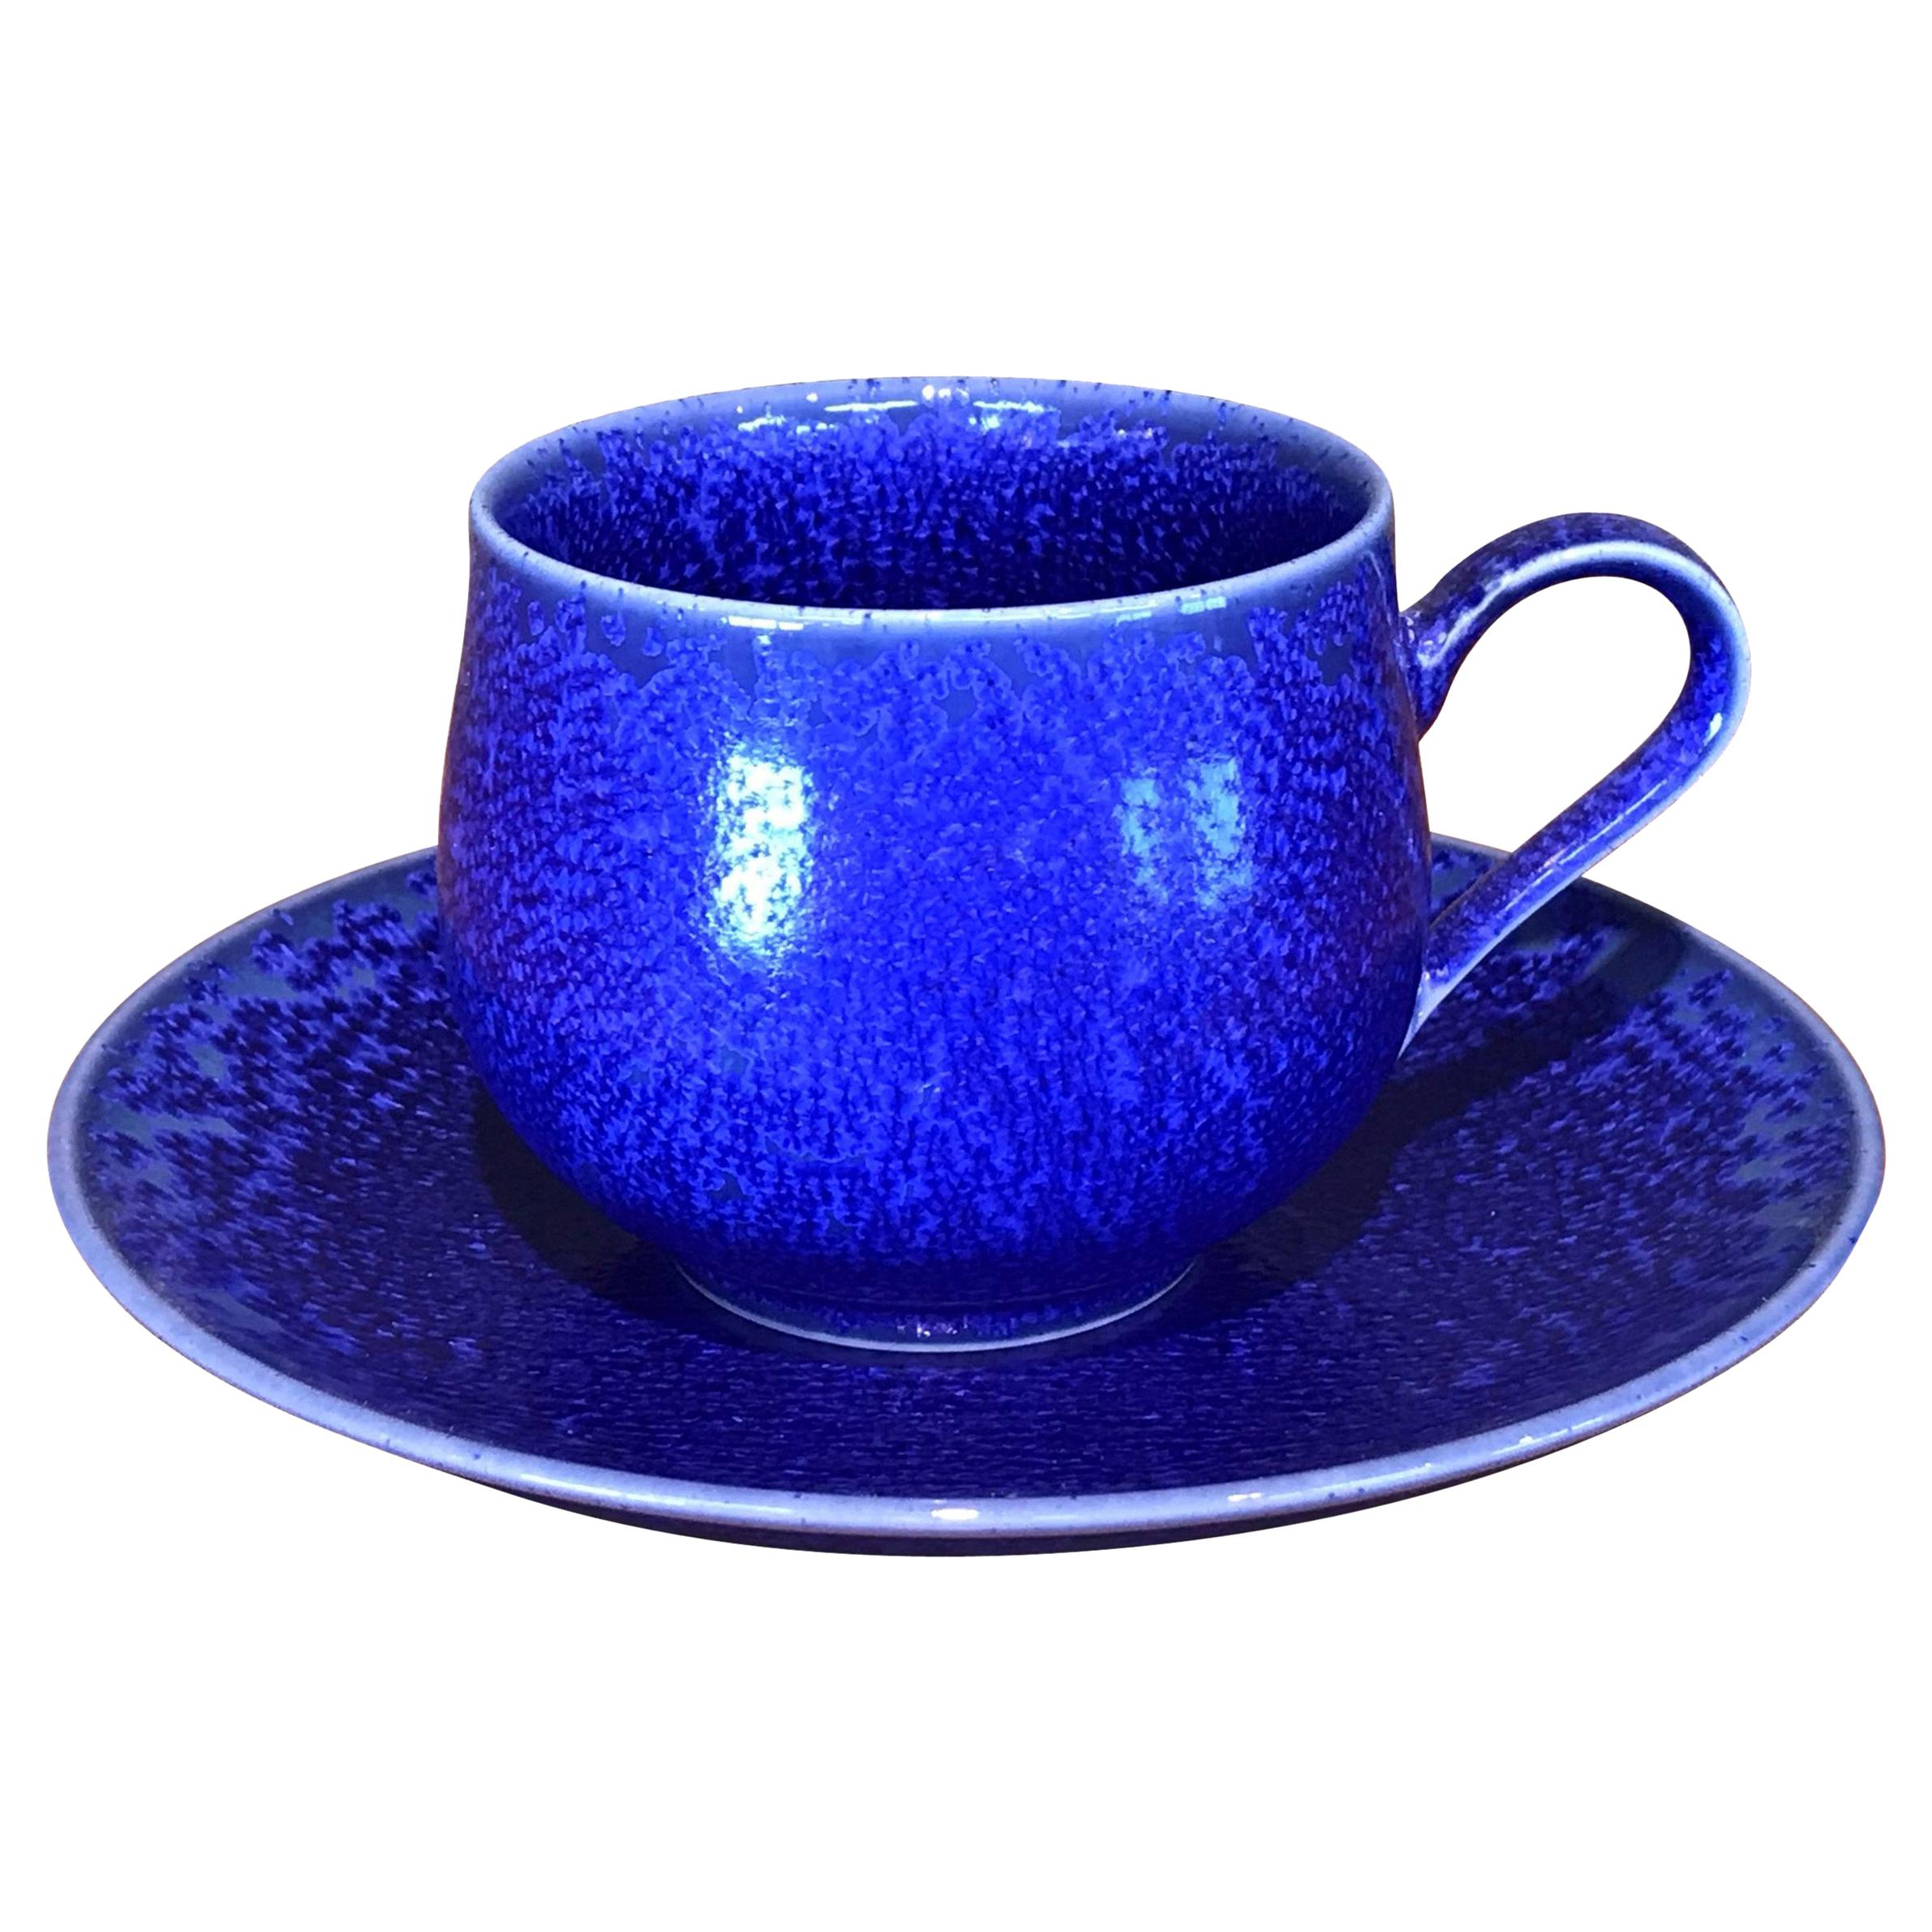 Japanese Blue Hand-Glazed Porcelain Cup and Saucer by Master Artist